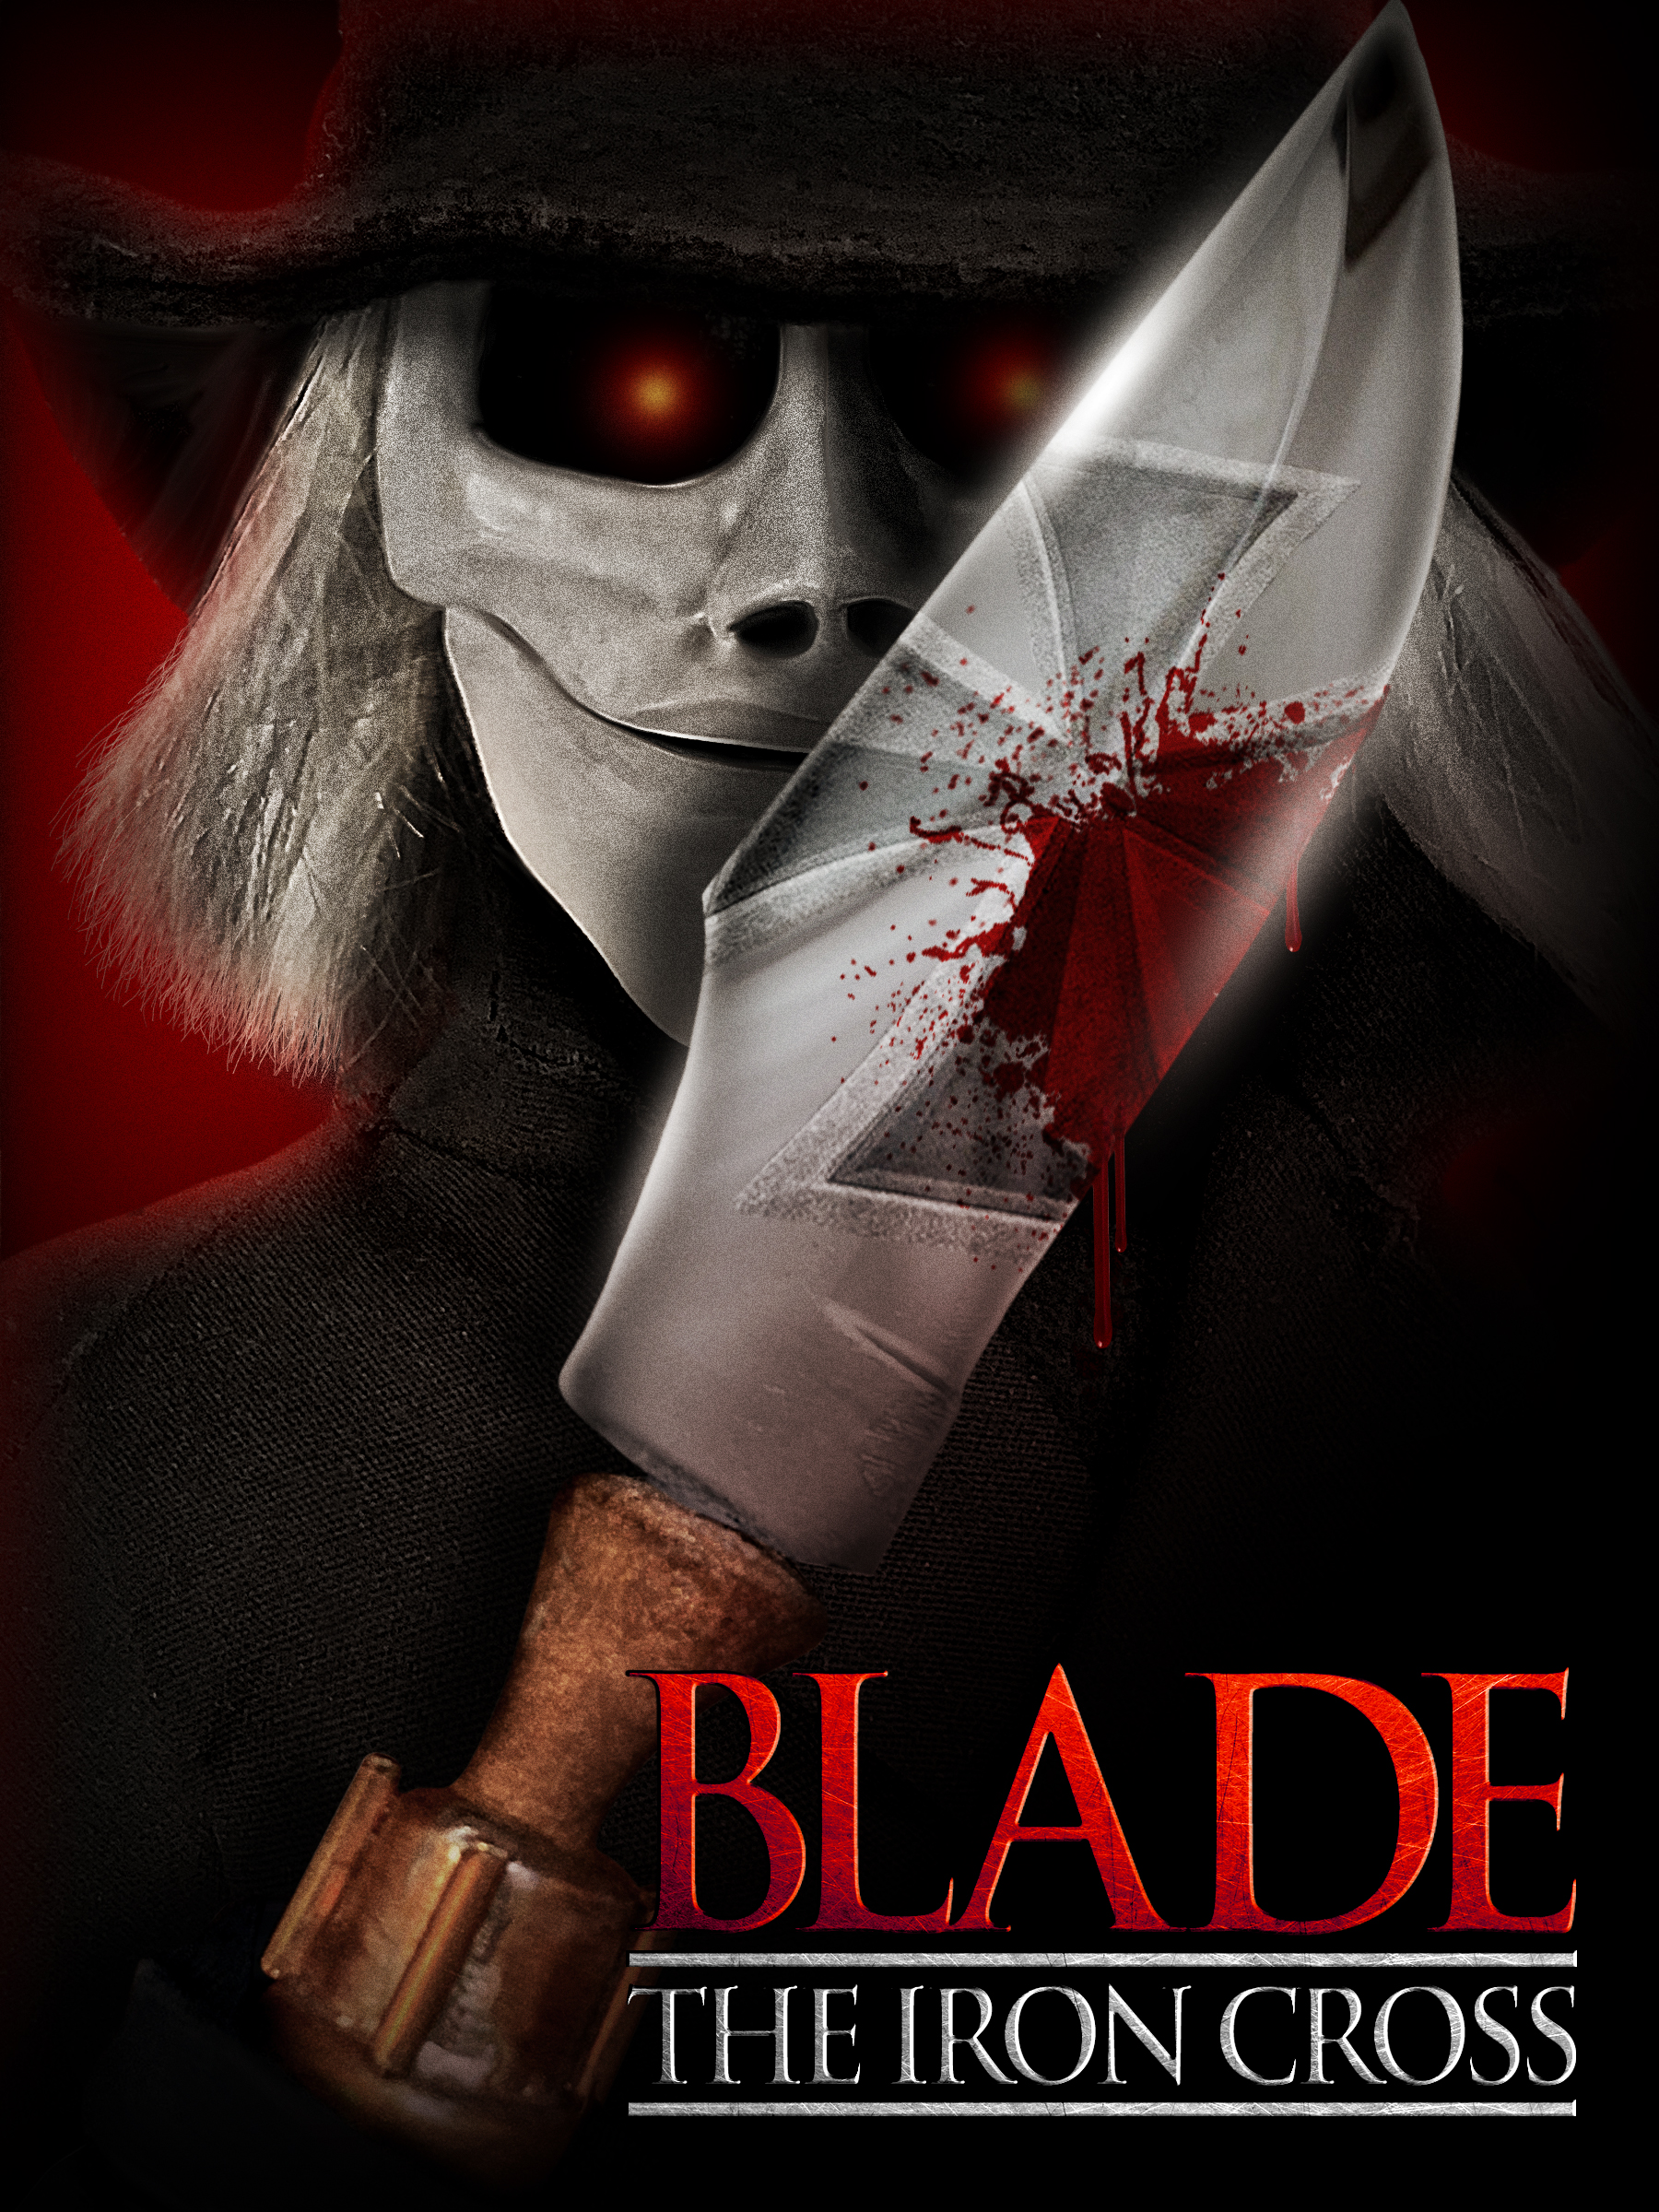 Geek insider, geekinsider, geekinsider. Com,, full moon features announces release date for latest puppet master film - 'blade: the iron cross, entertainment